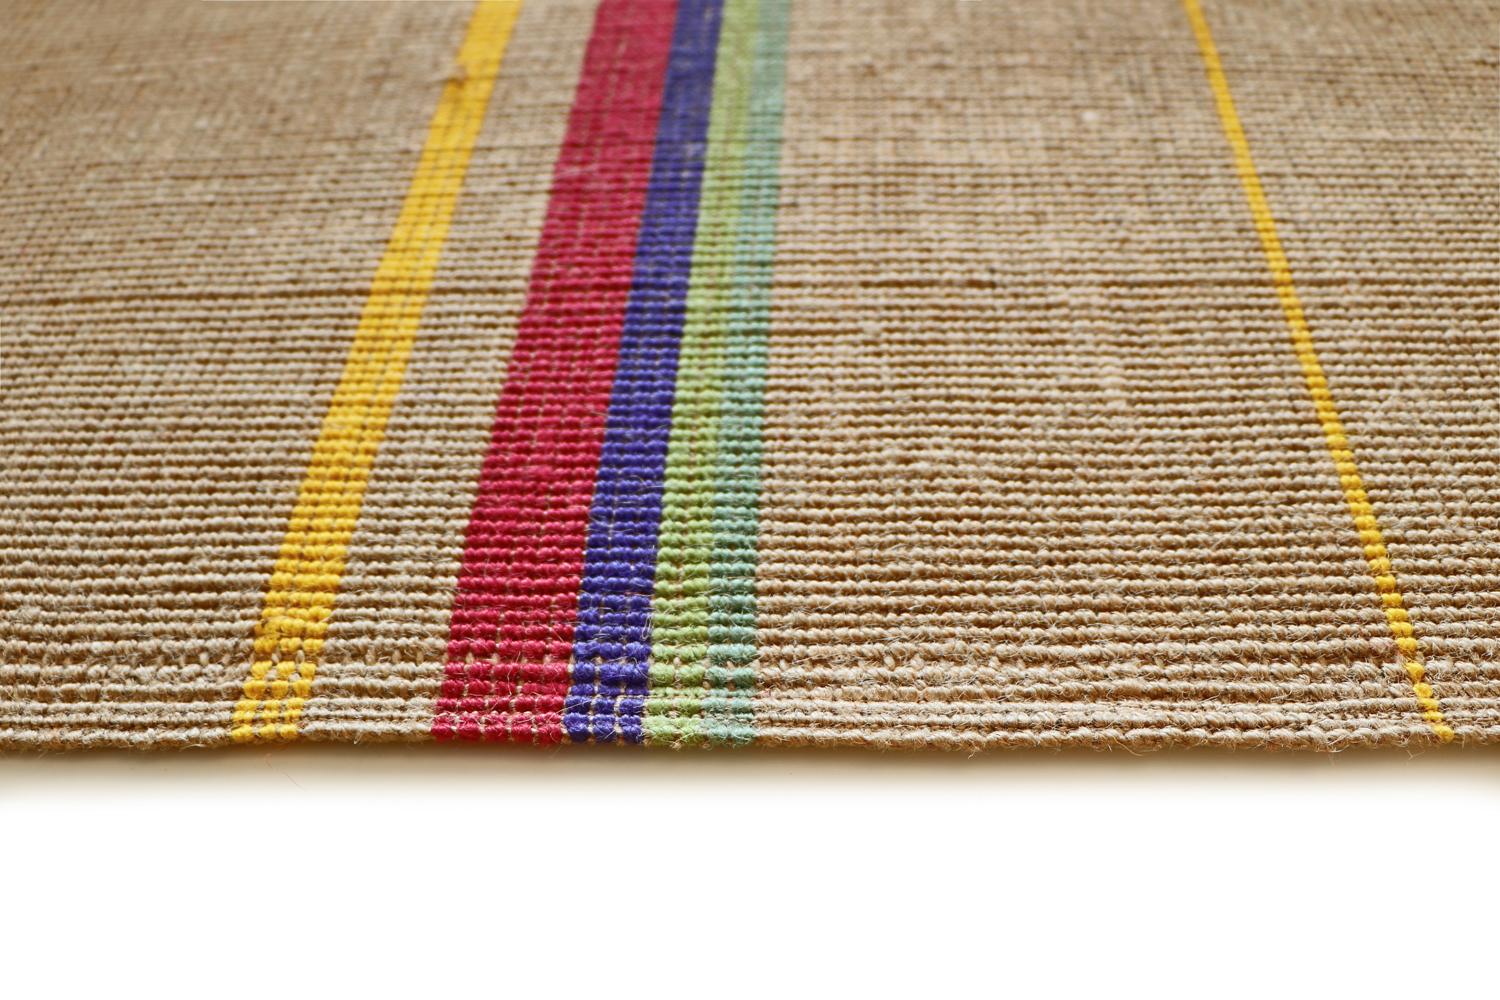 Nature Inspired Striped Spring Thin Rug by Deanna Comellini In Stock 200x250 cm For Sale 2